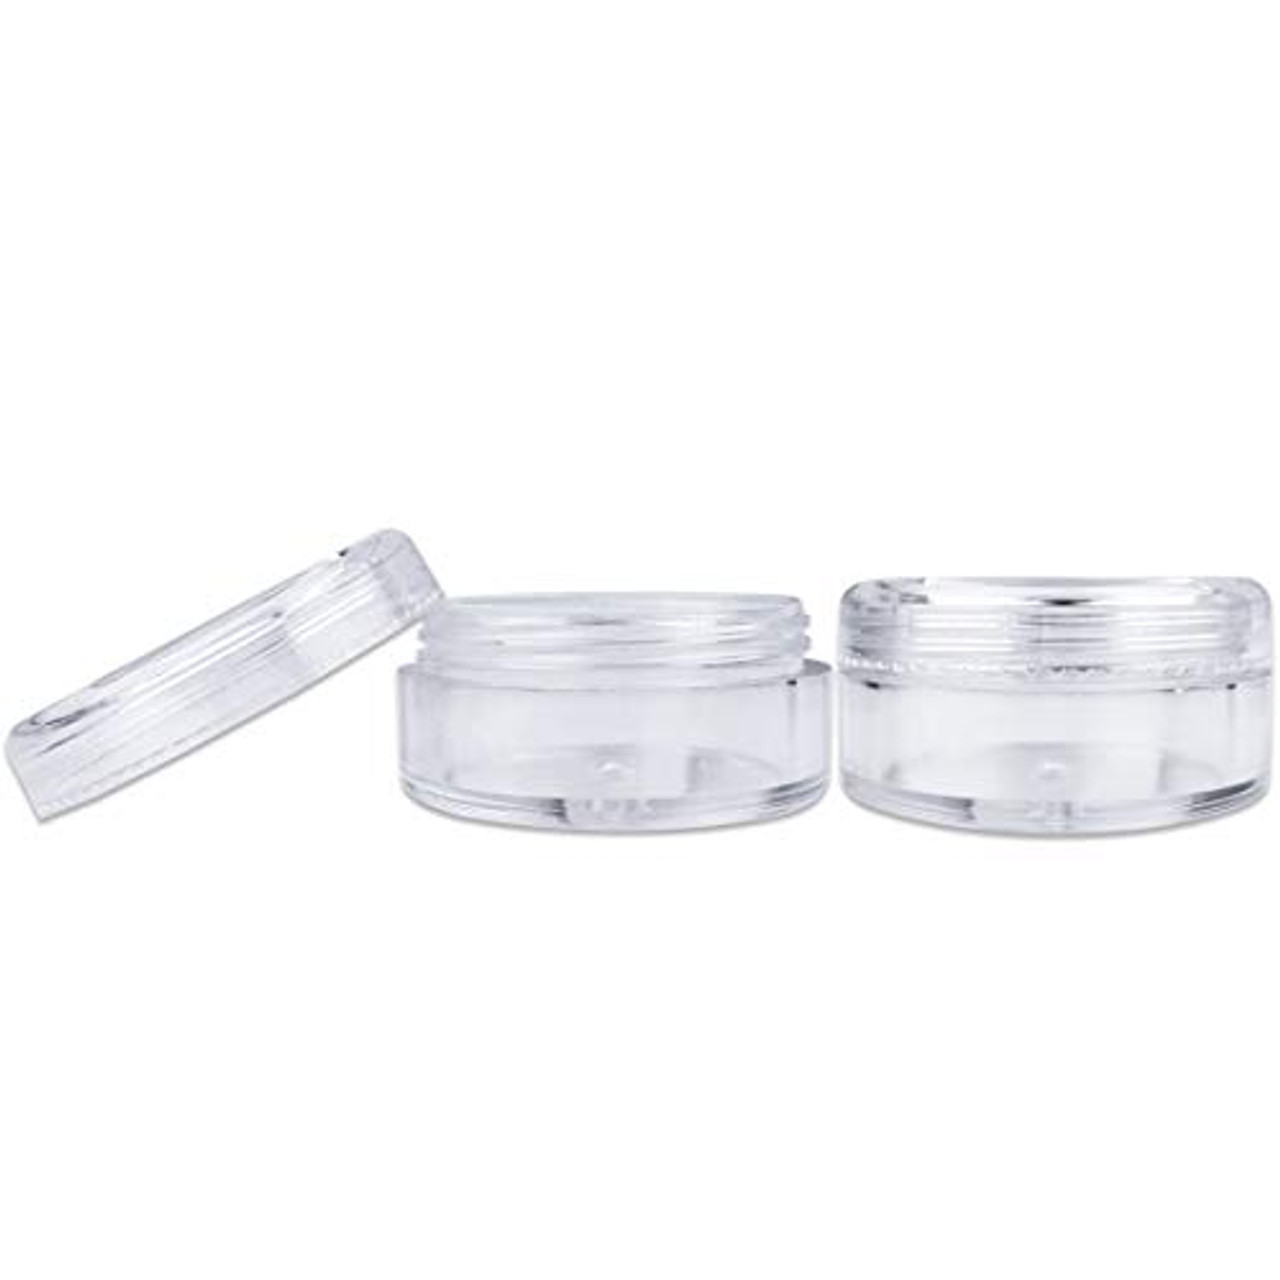 25/50/100/200 Clear Plastic Cosmetic Sample Containers - 5 Gram (Pack 25)